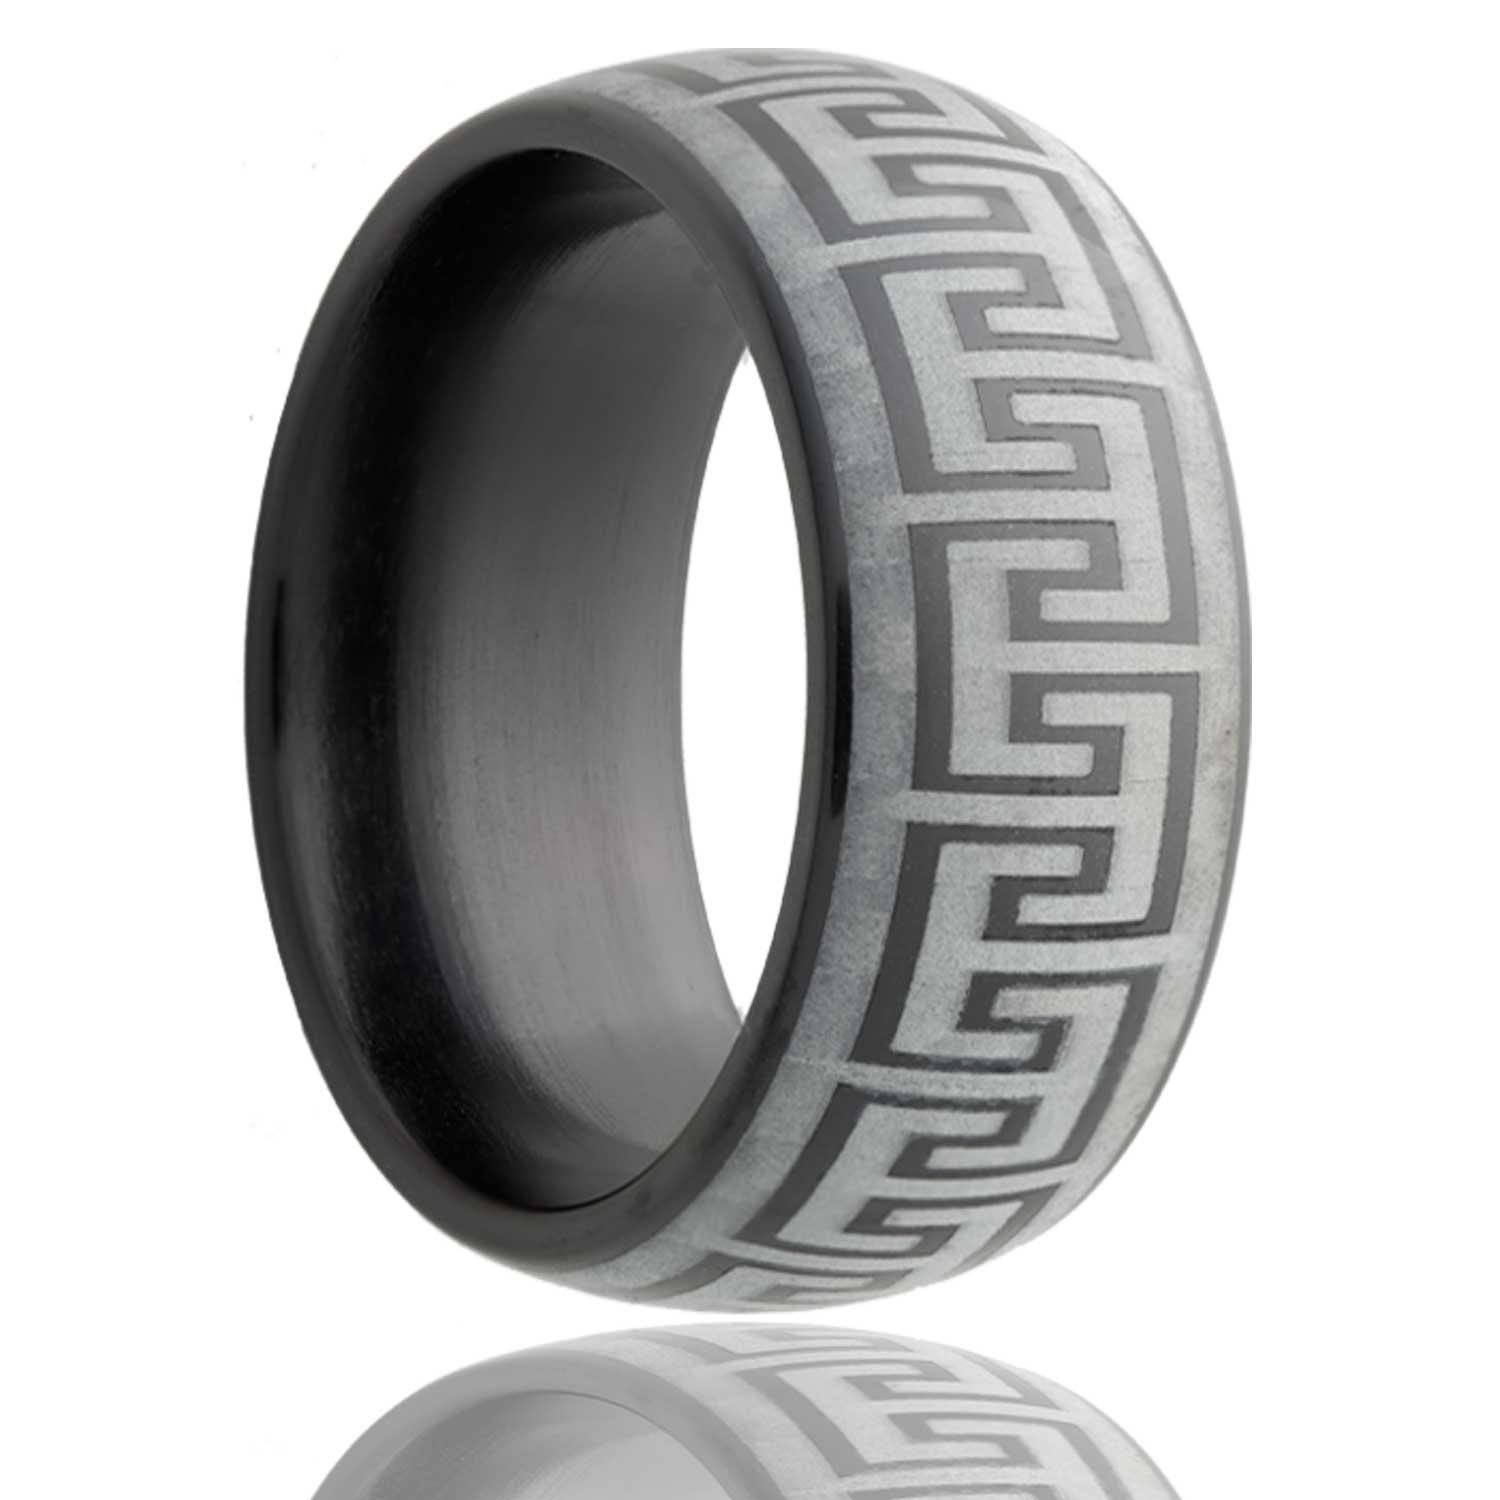 A greek key domed zirconium wedding band displayed on a neutral white background.